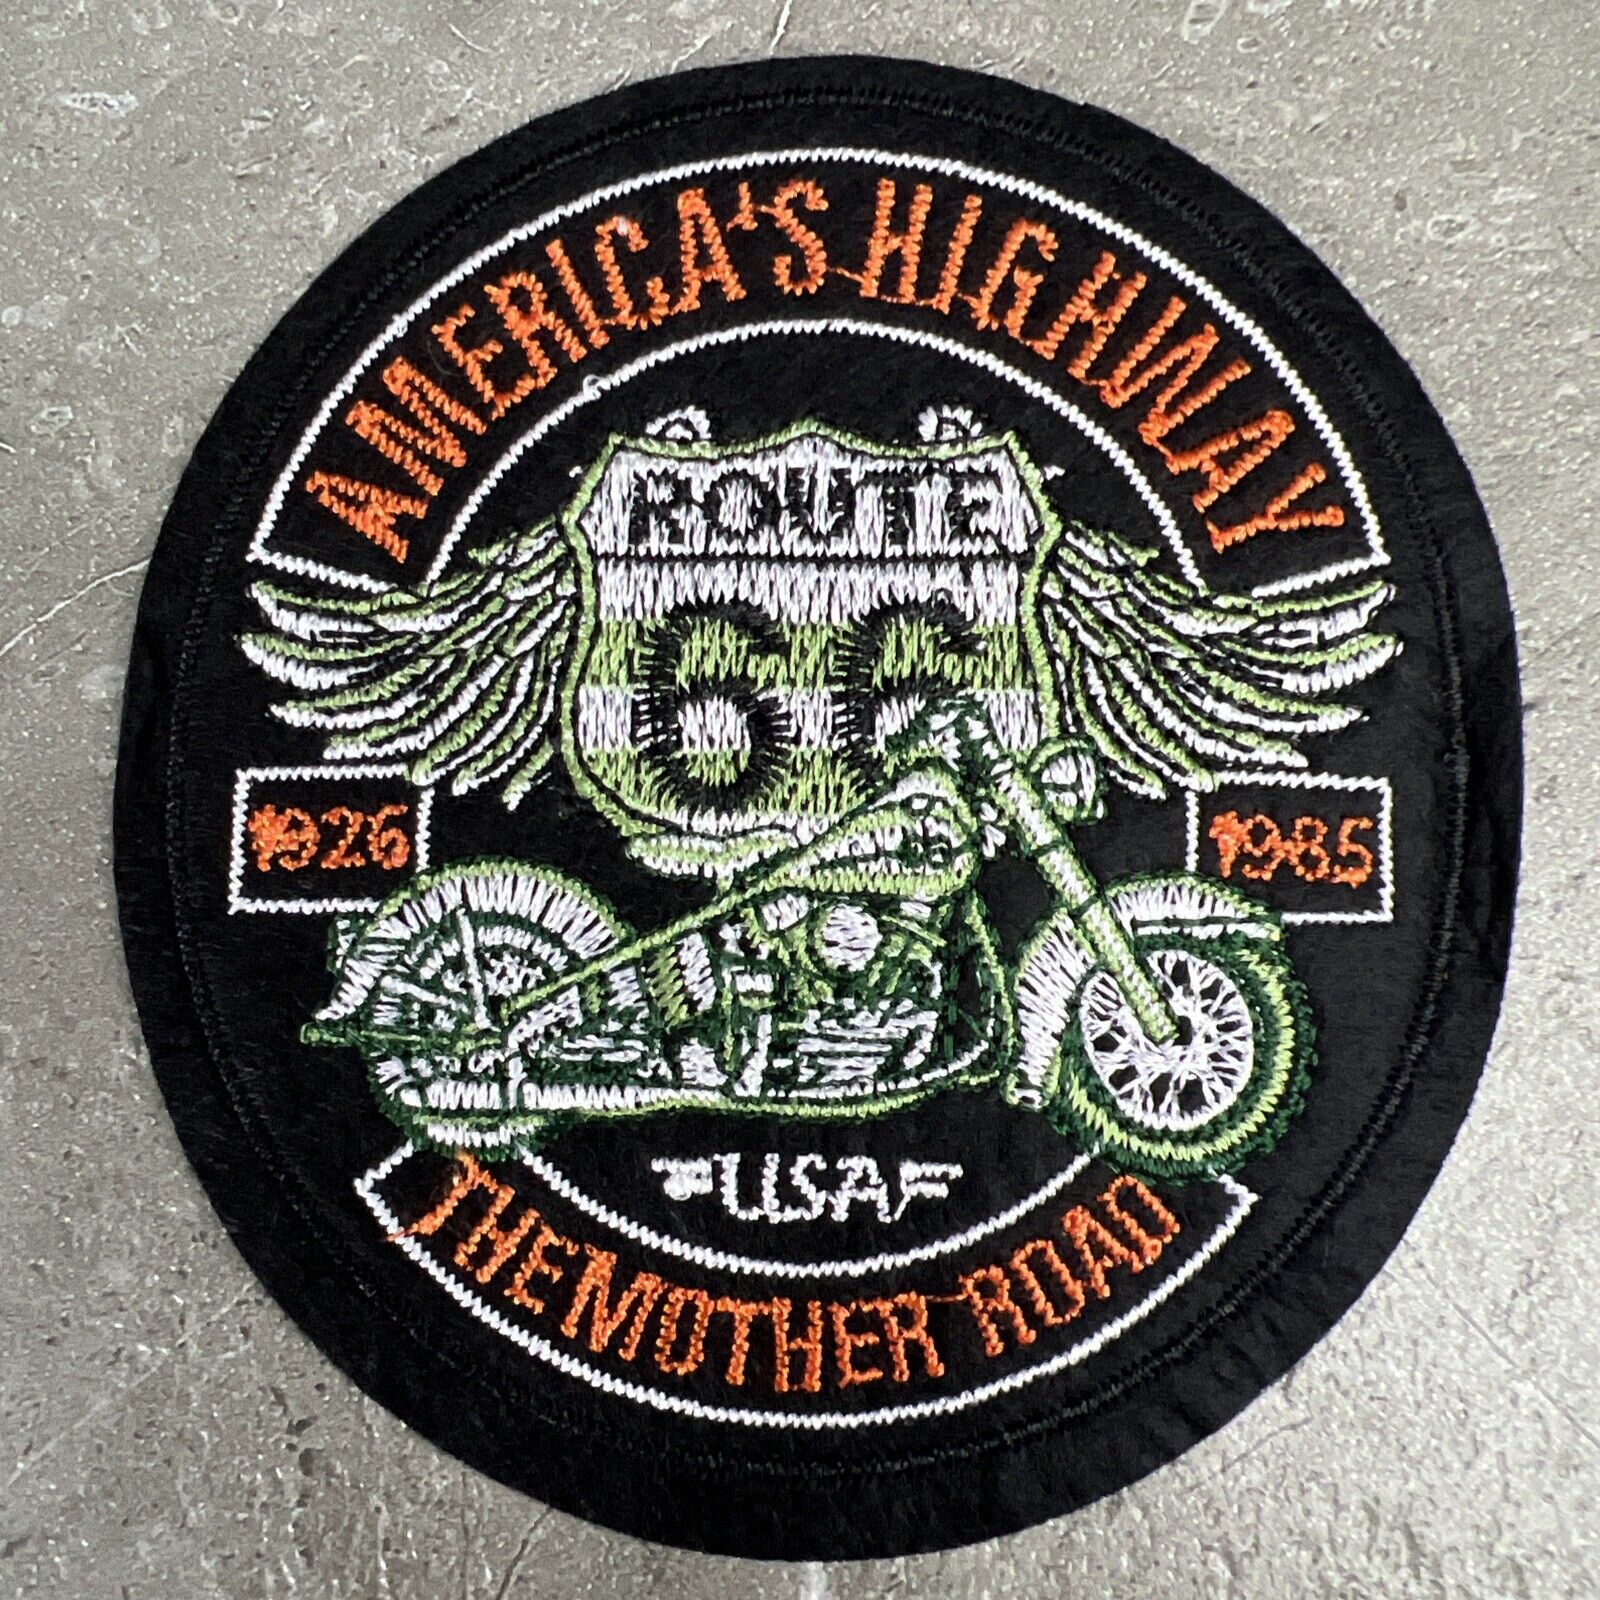 🔥 Route 66 Harley Davidson Motorcycle Embroidered Sew Iron On Biker MC Patch